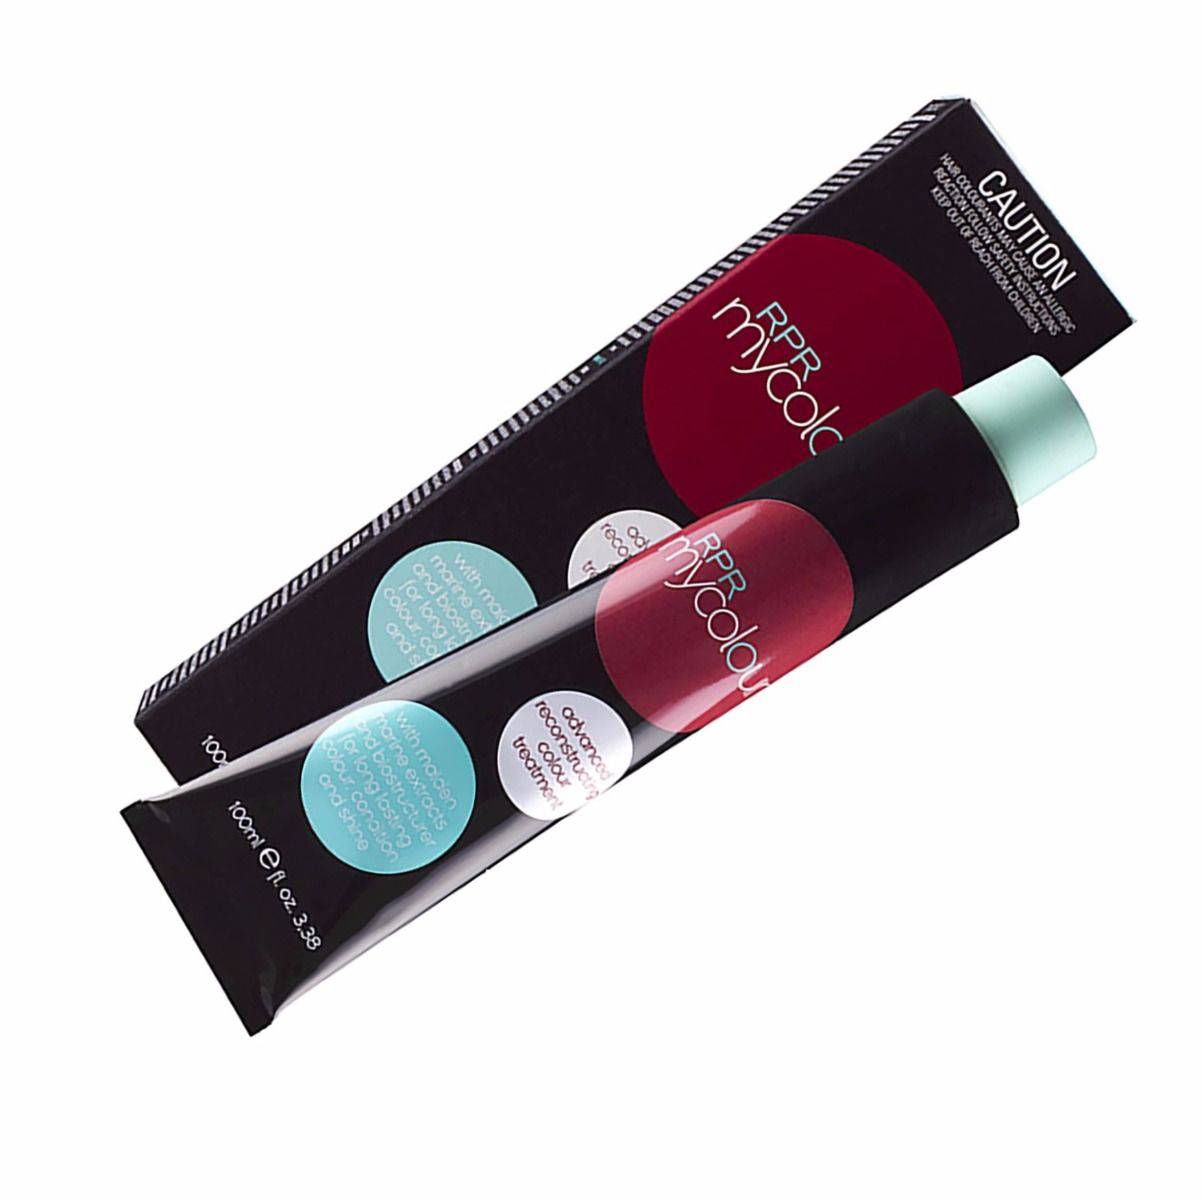 RPR My Colour V Violet Concentrate 100g tube Mix 1:1.5 My Colour - On Line Hair Depot